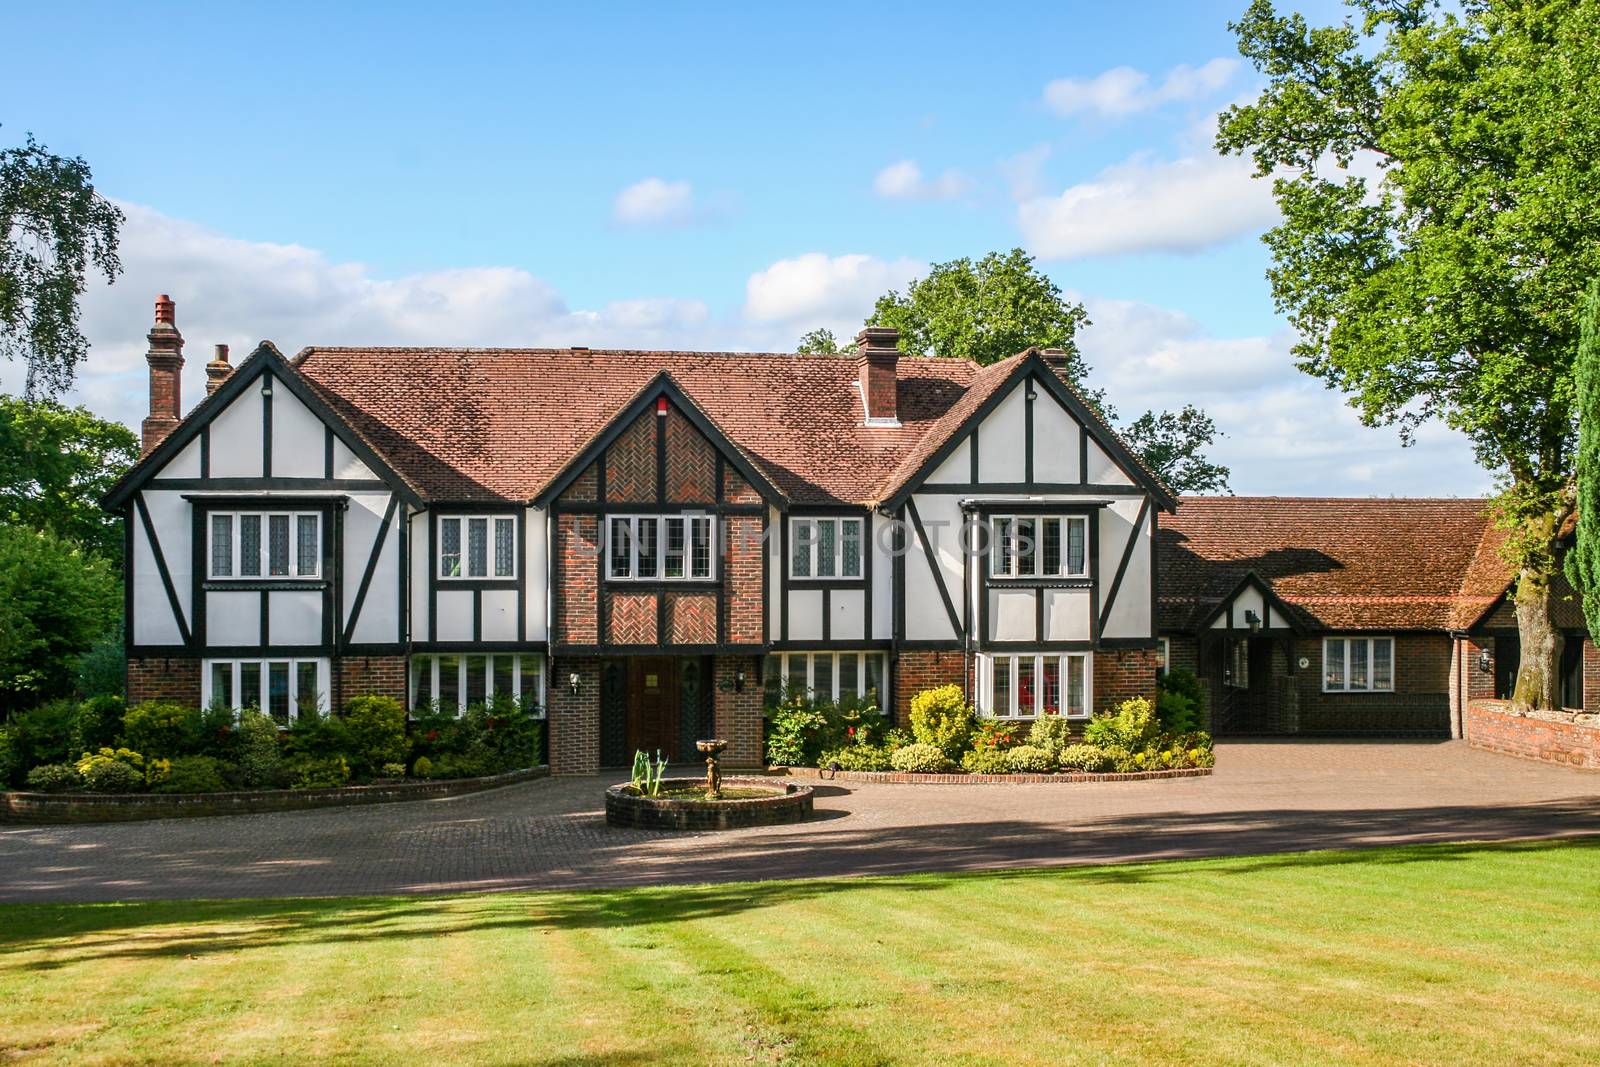 A large estate home, tudor style, in the UK